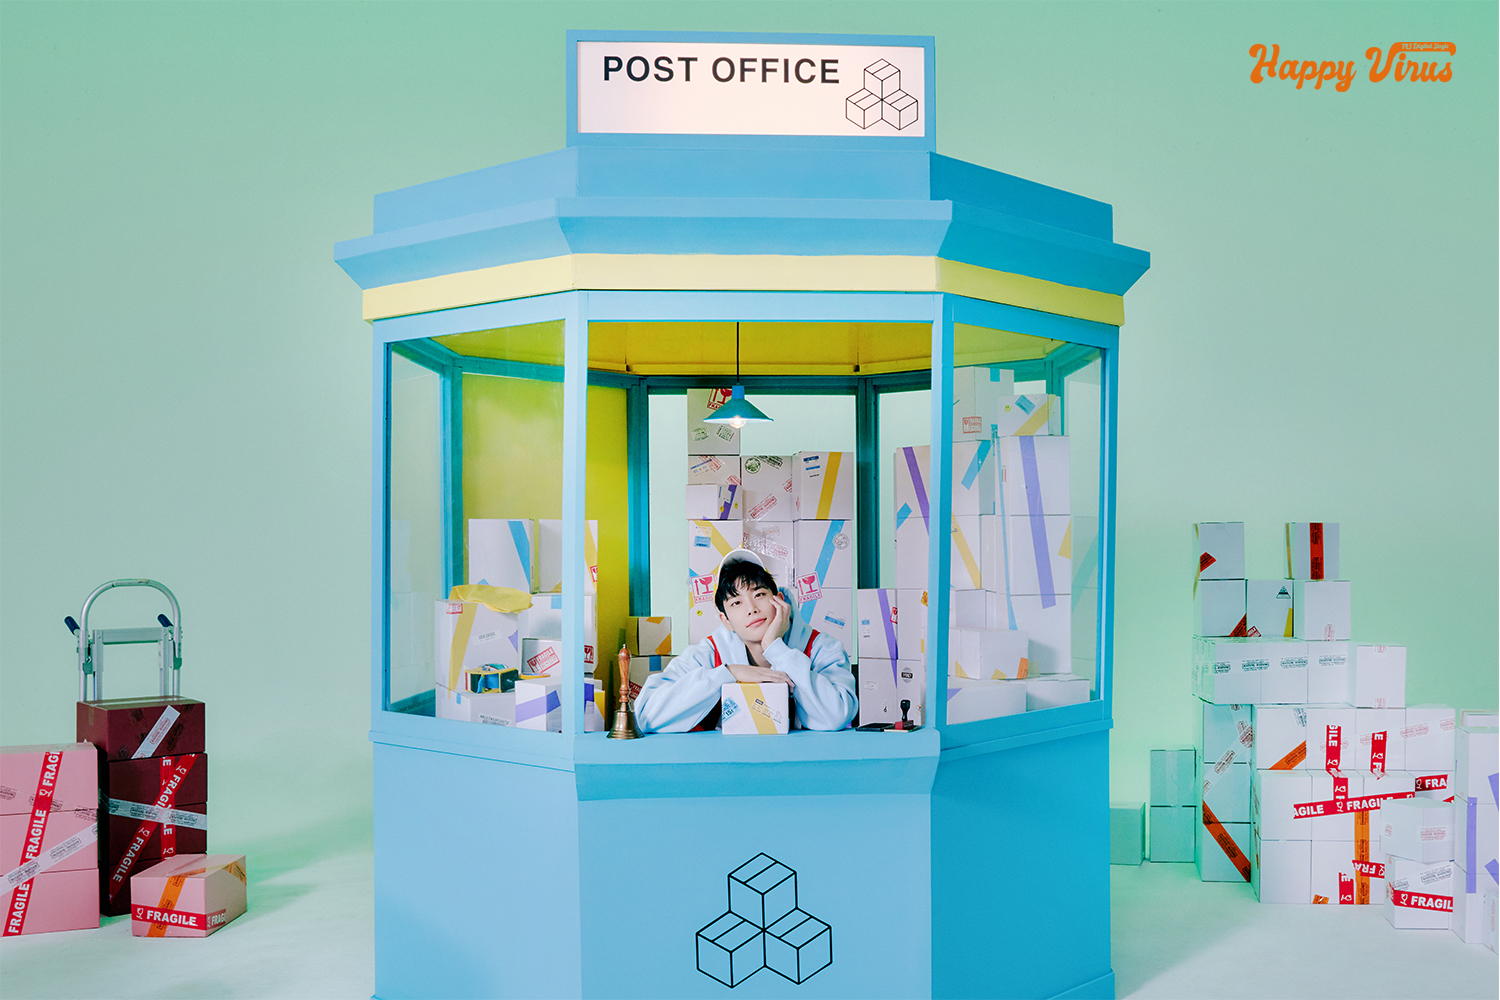 Astro MJ releases solo debut songs 'Happy Virus', 'Valet Parking' today